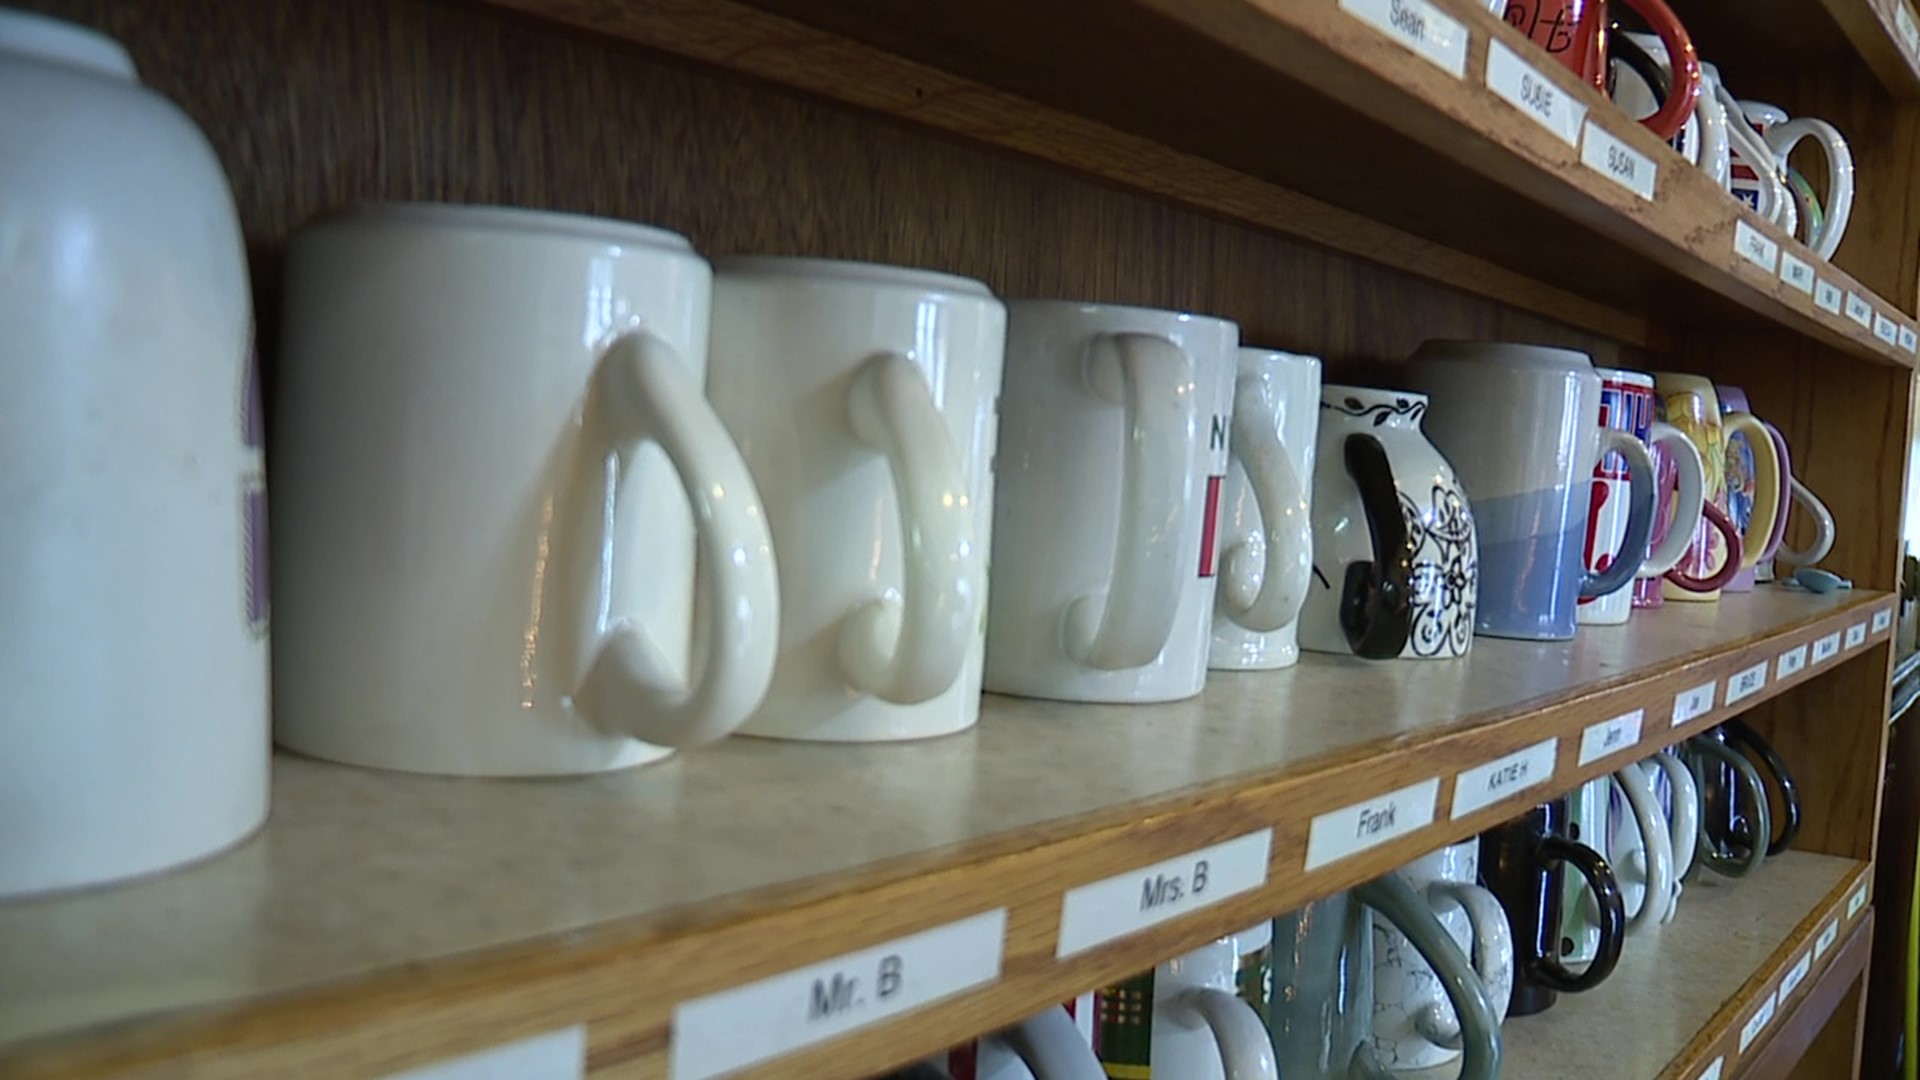 Longworth's Restaurant in Jermyn has a unique feature lining its shelves: Hundreds of customers' coffee mugs.